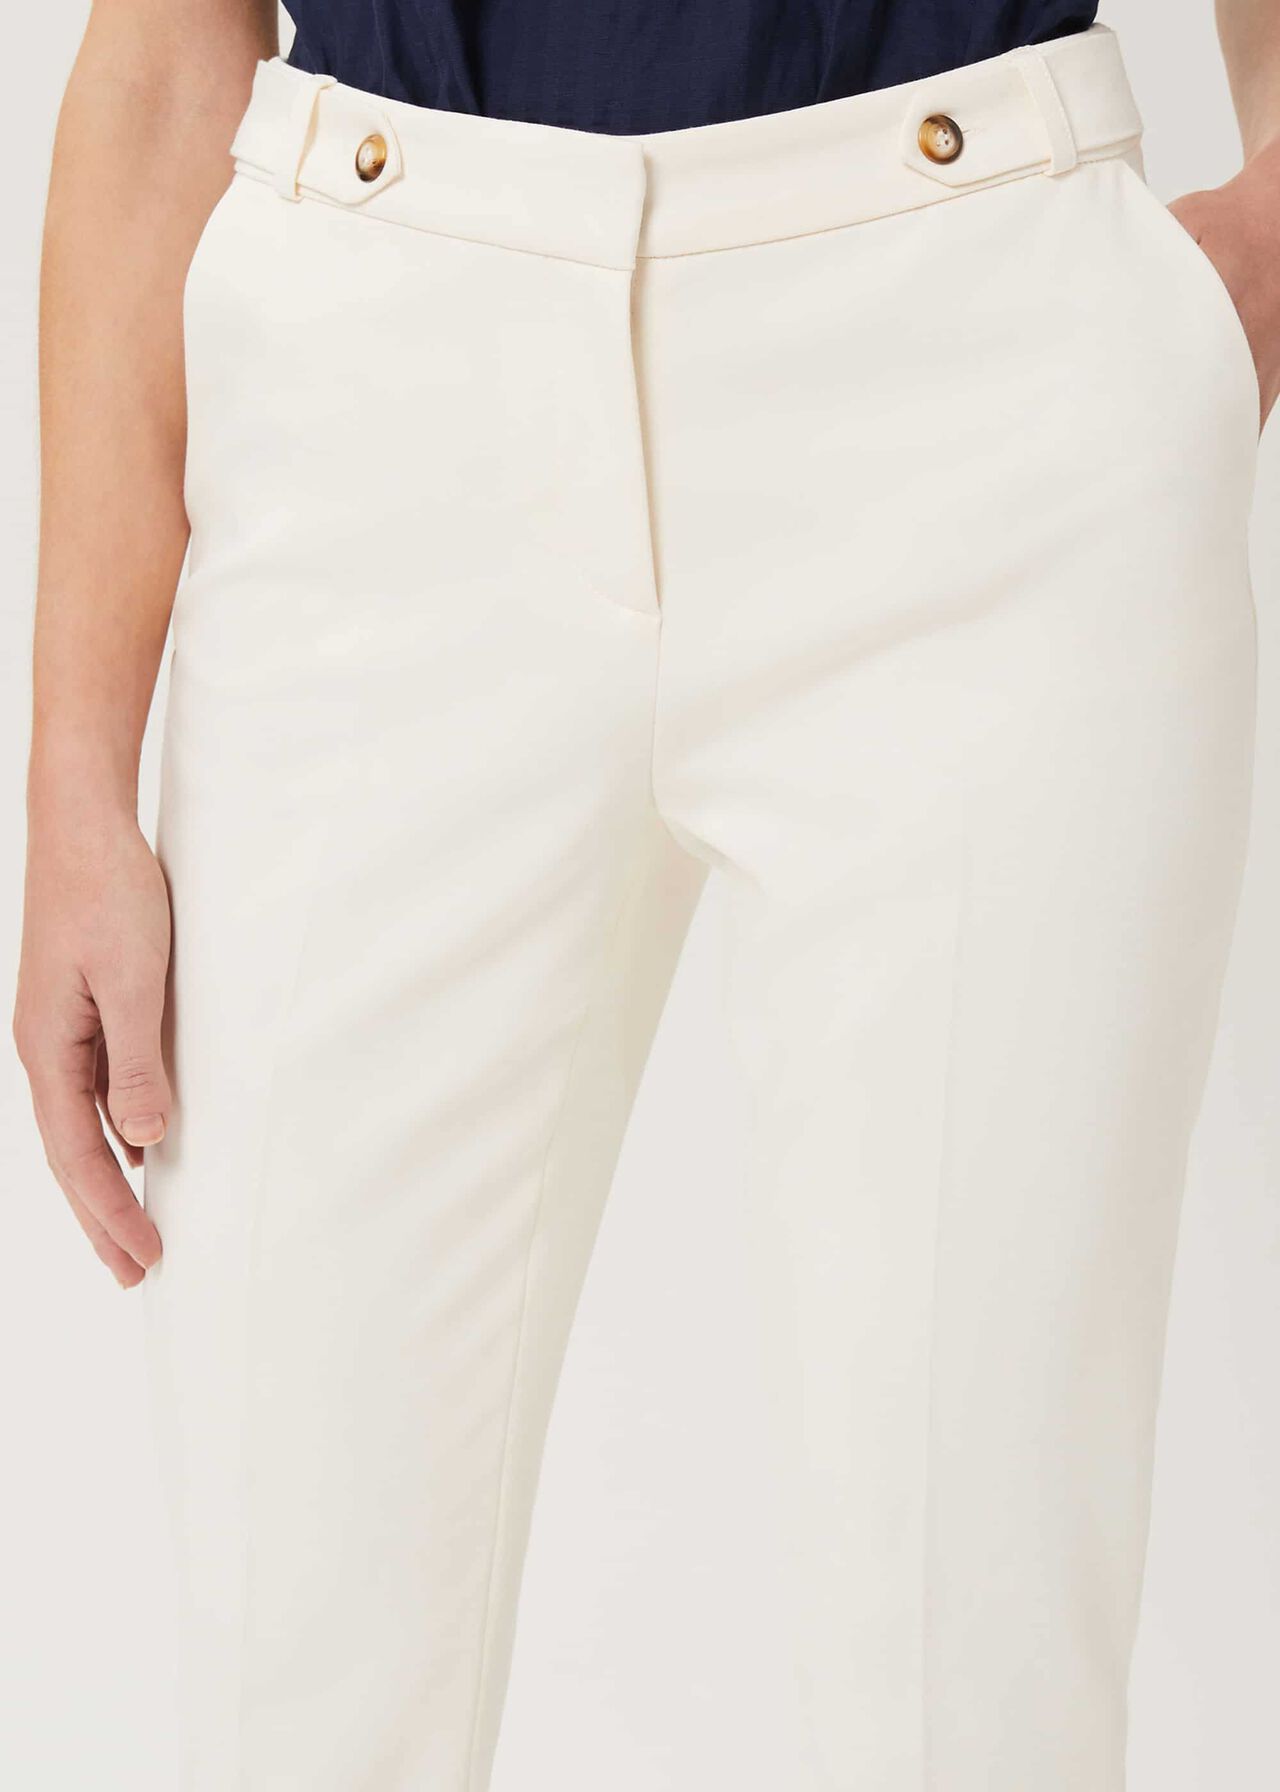 Jasmine Cotton Blend Tapered Trousers, Warm Ivory, hi-res